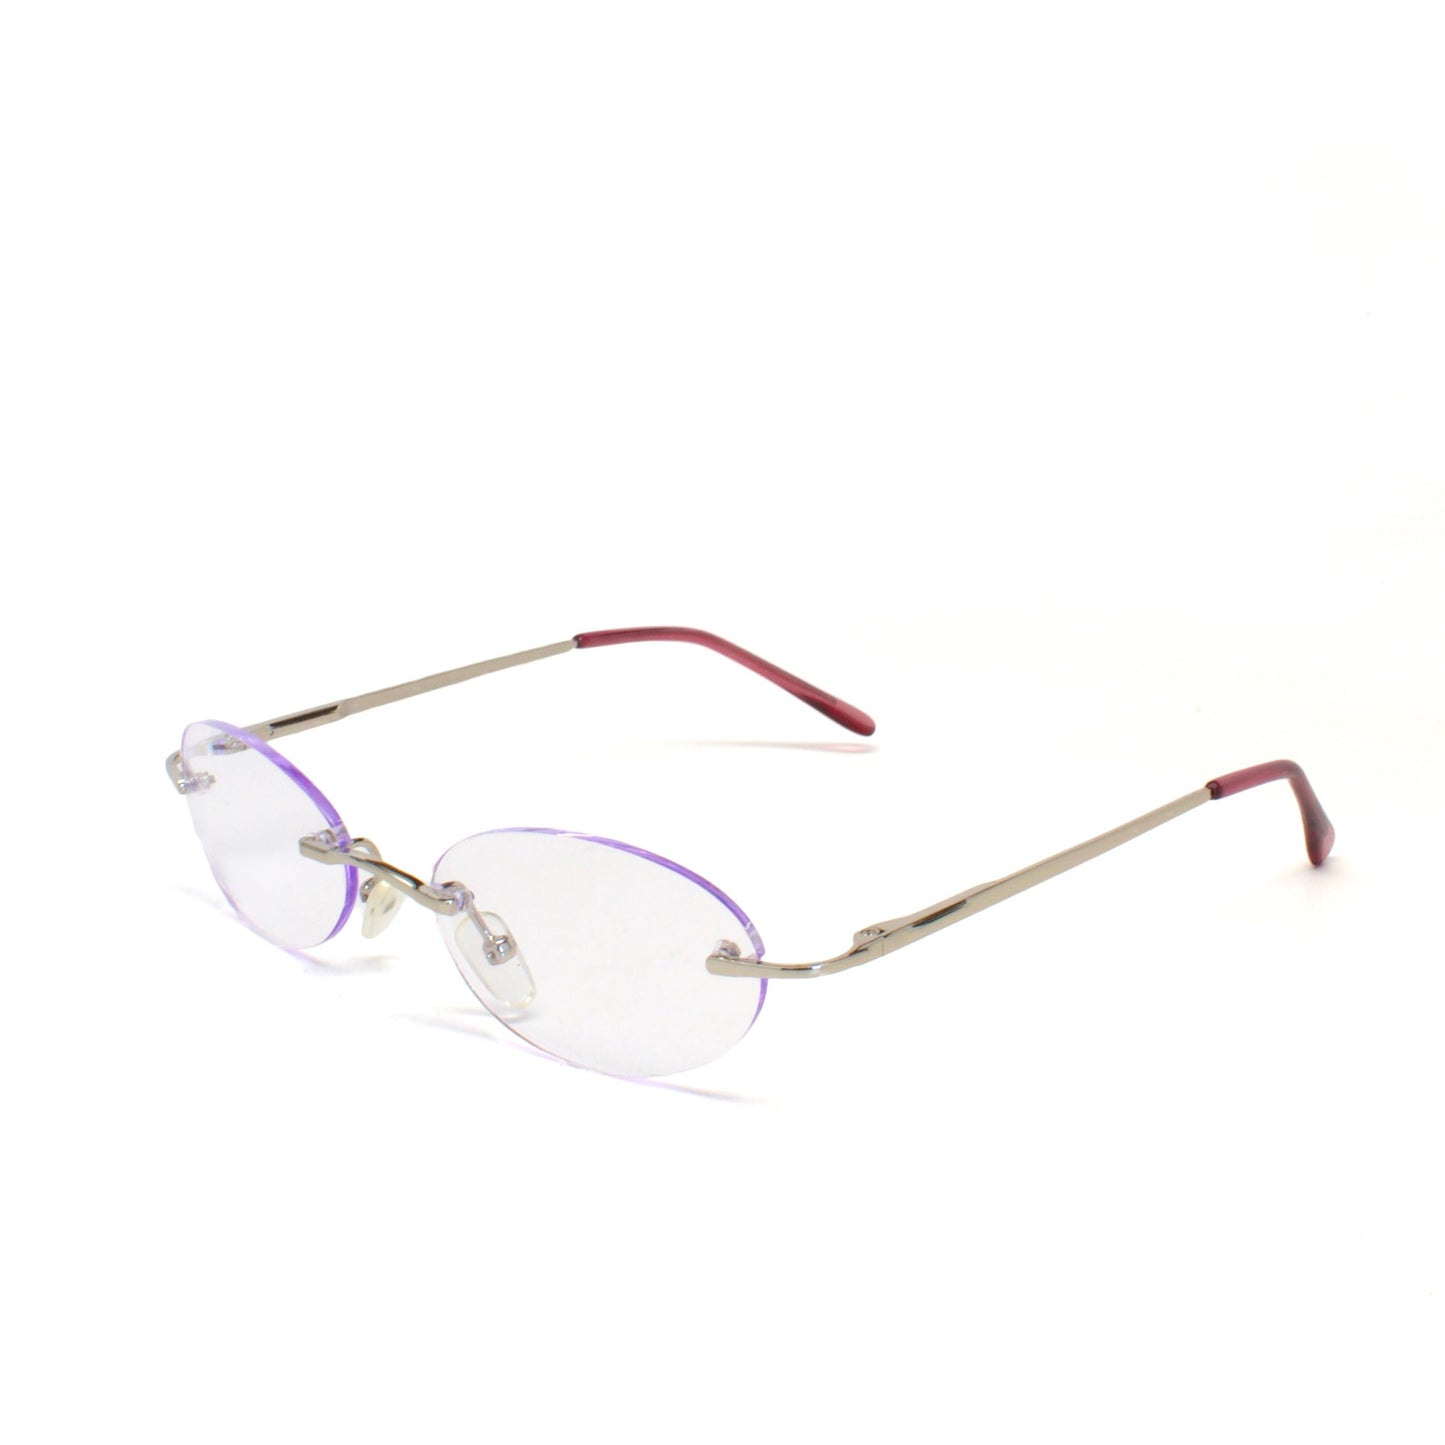 Vintage Small Size 2001 Light Tinted Non Framed Sunglasses - Purple